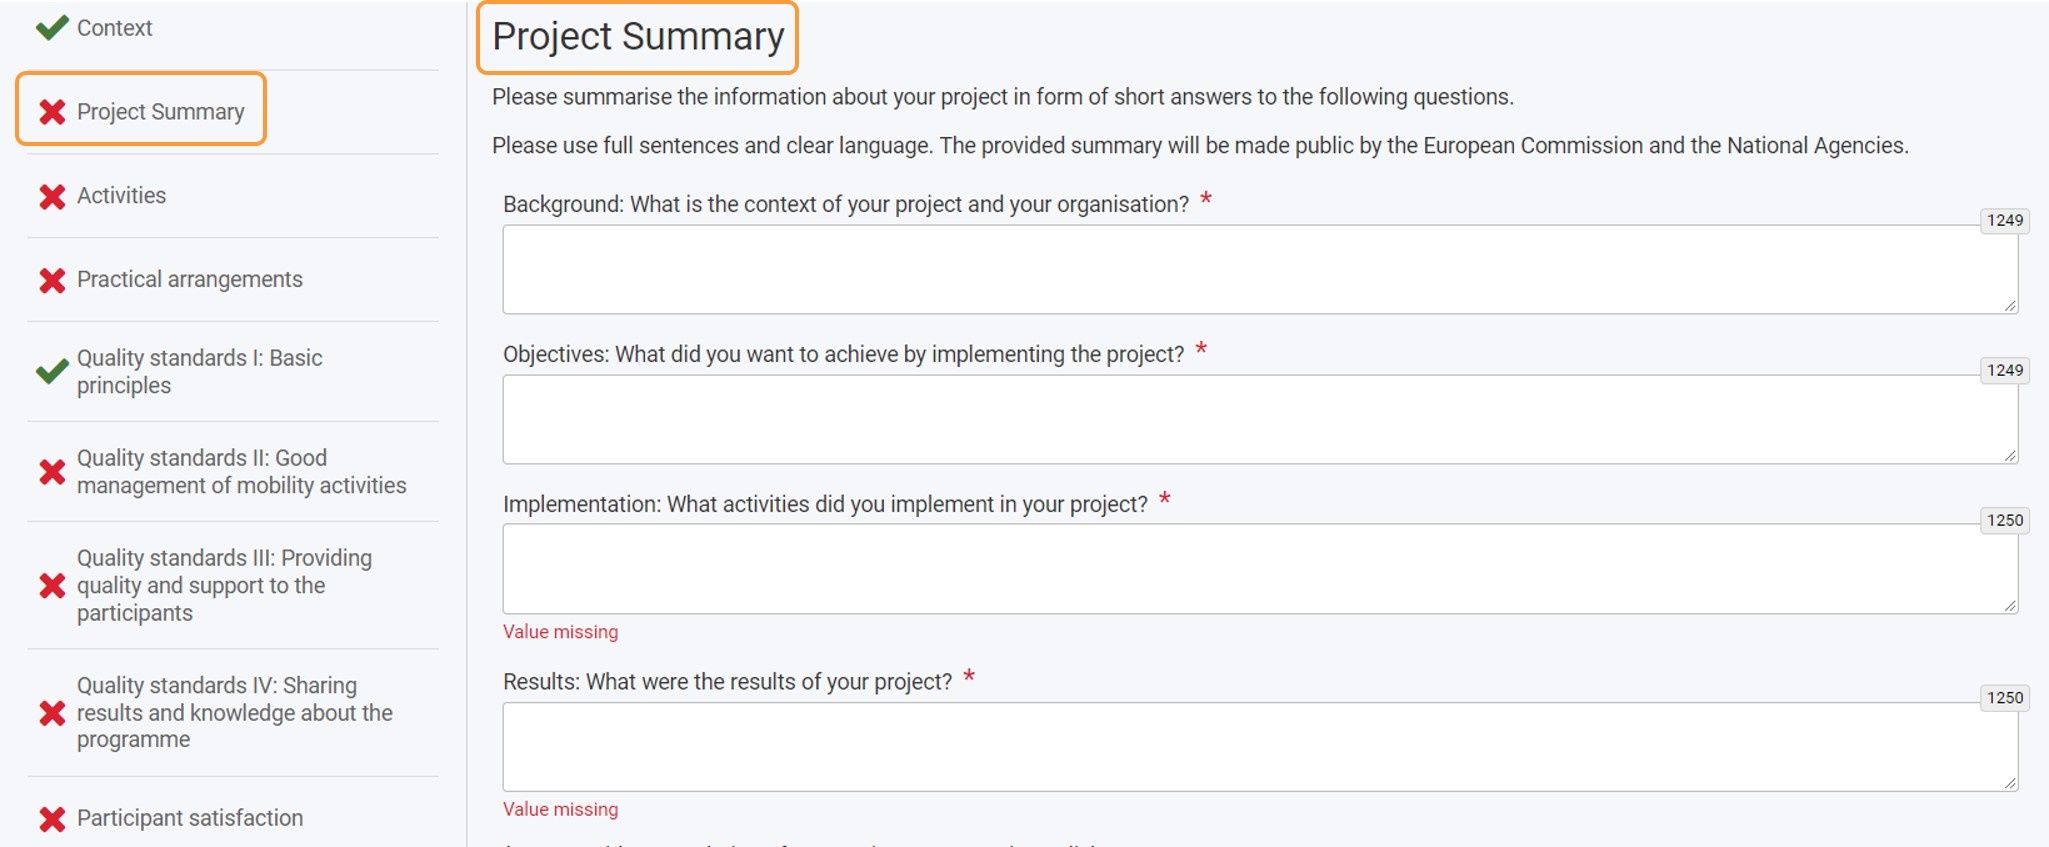 Fill in the Project Summary section